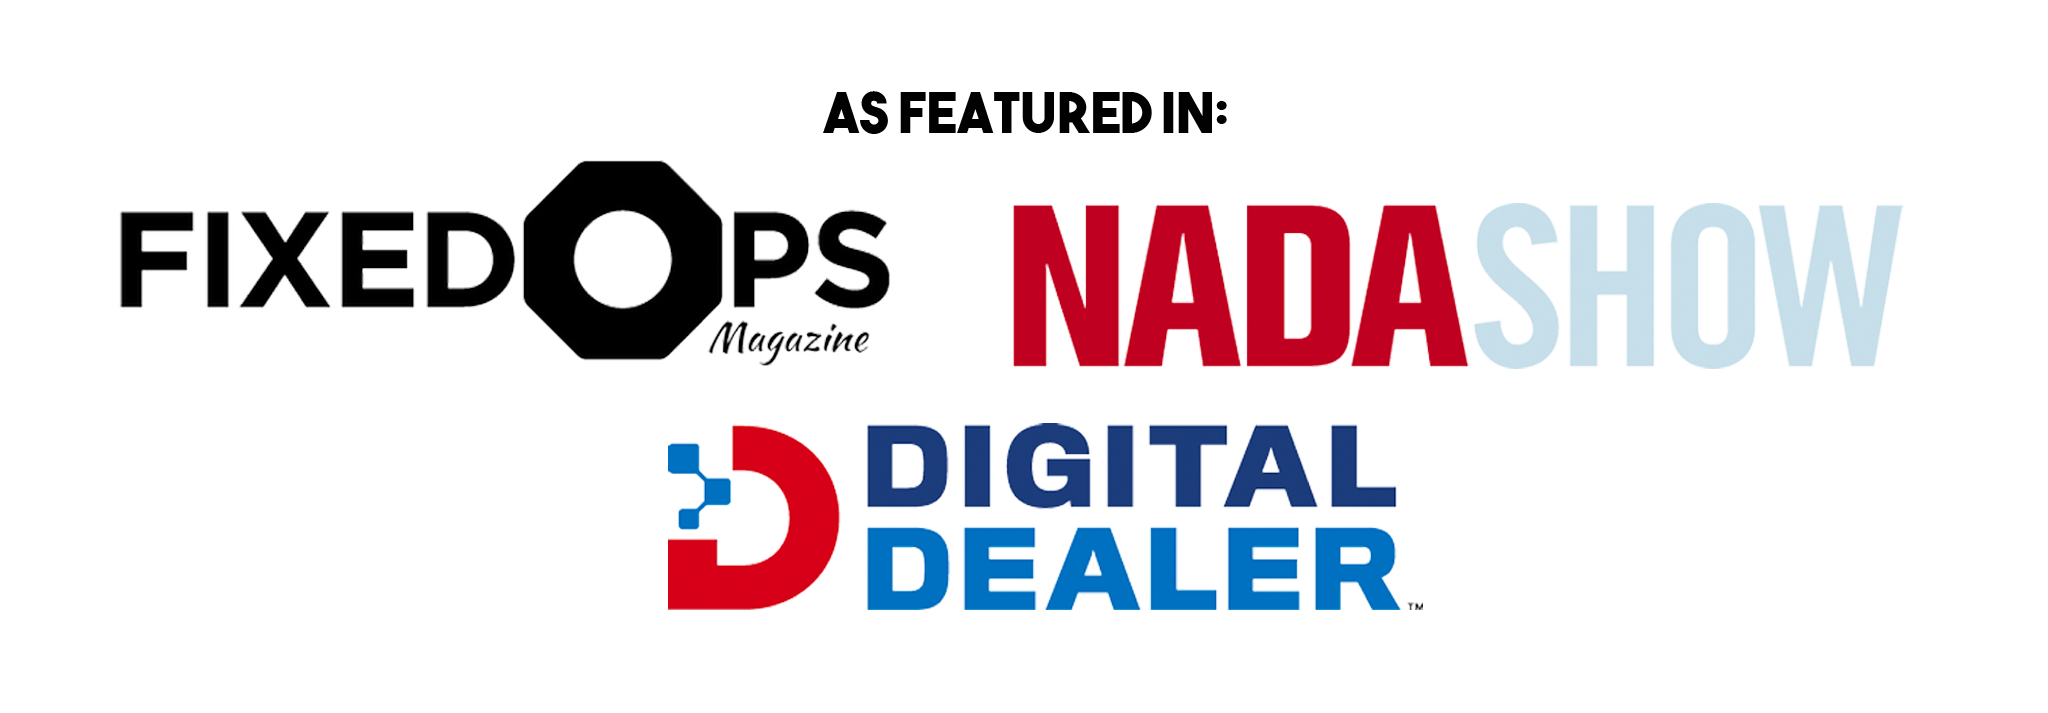 DGA Auto BDC Featured In Digital Dealer, Fixed Ops Magazine and NADA Show